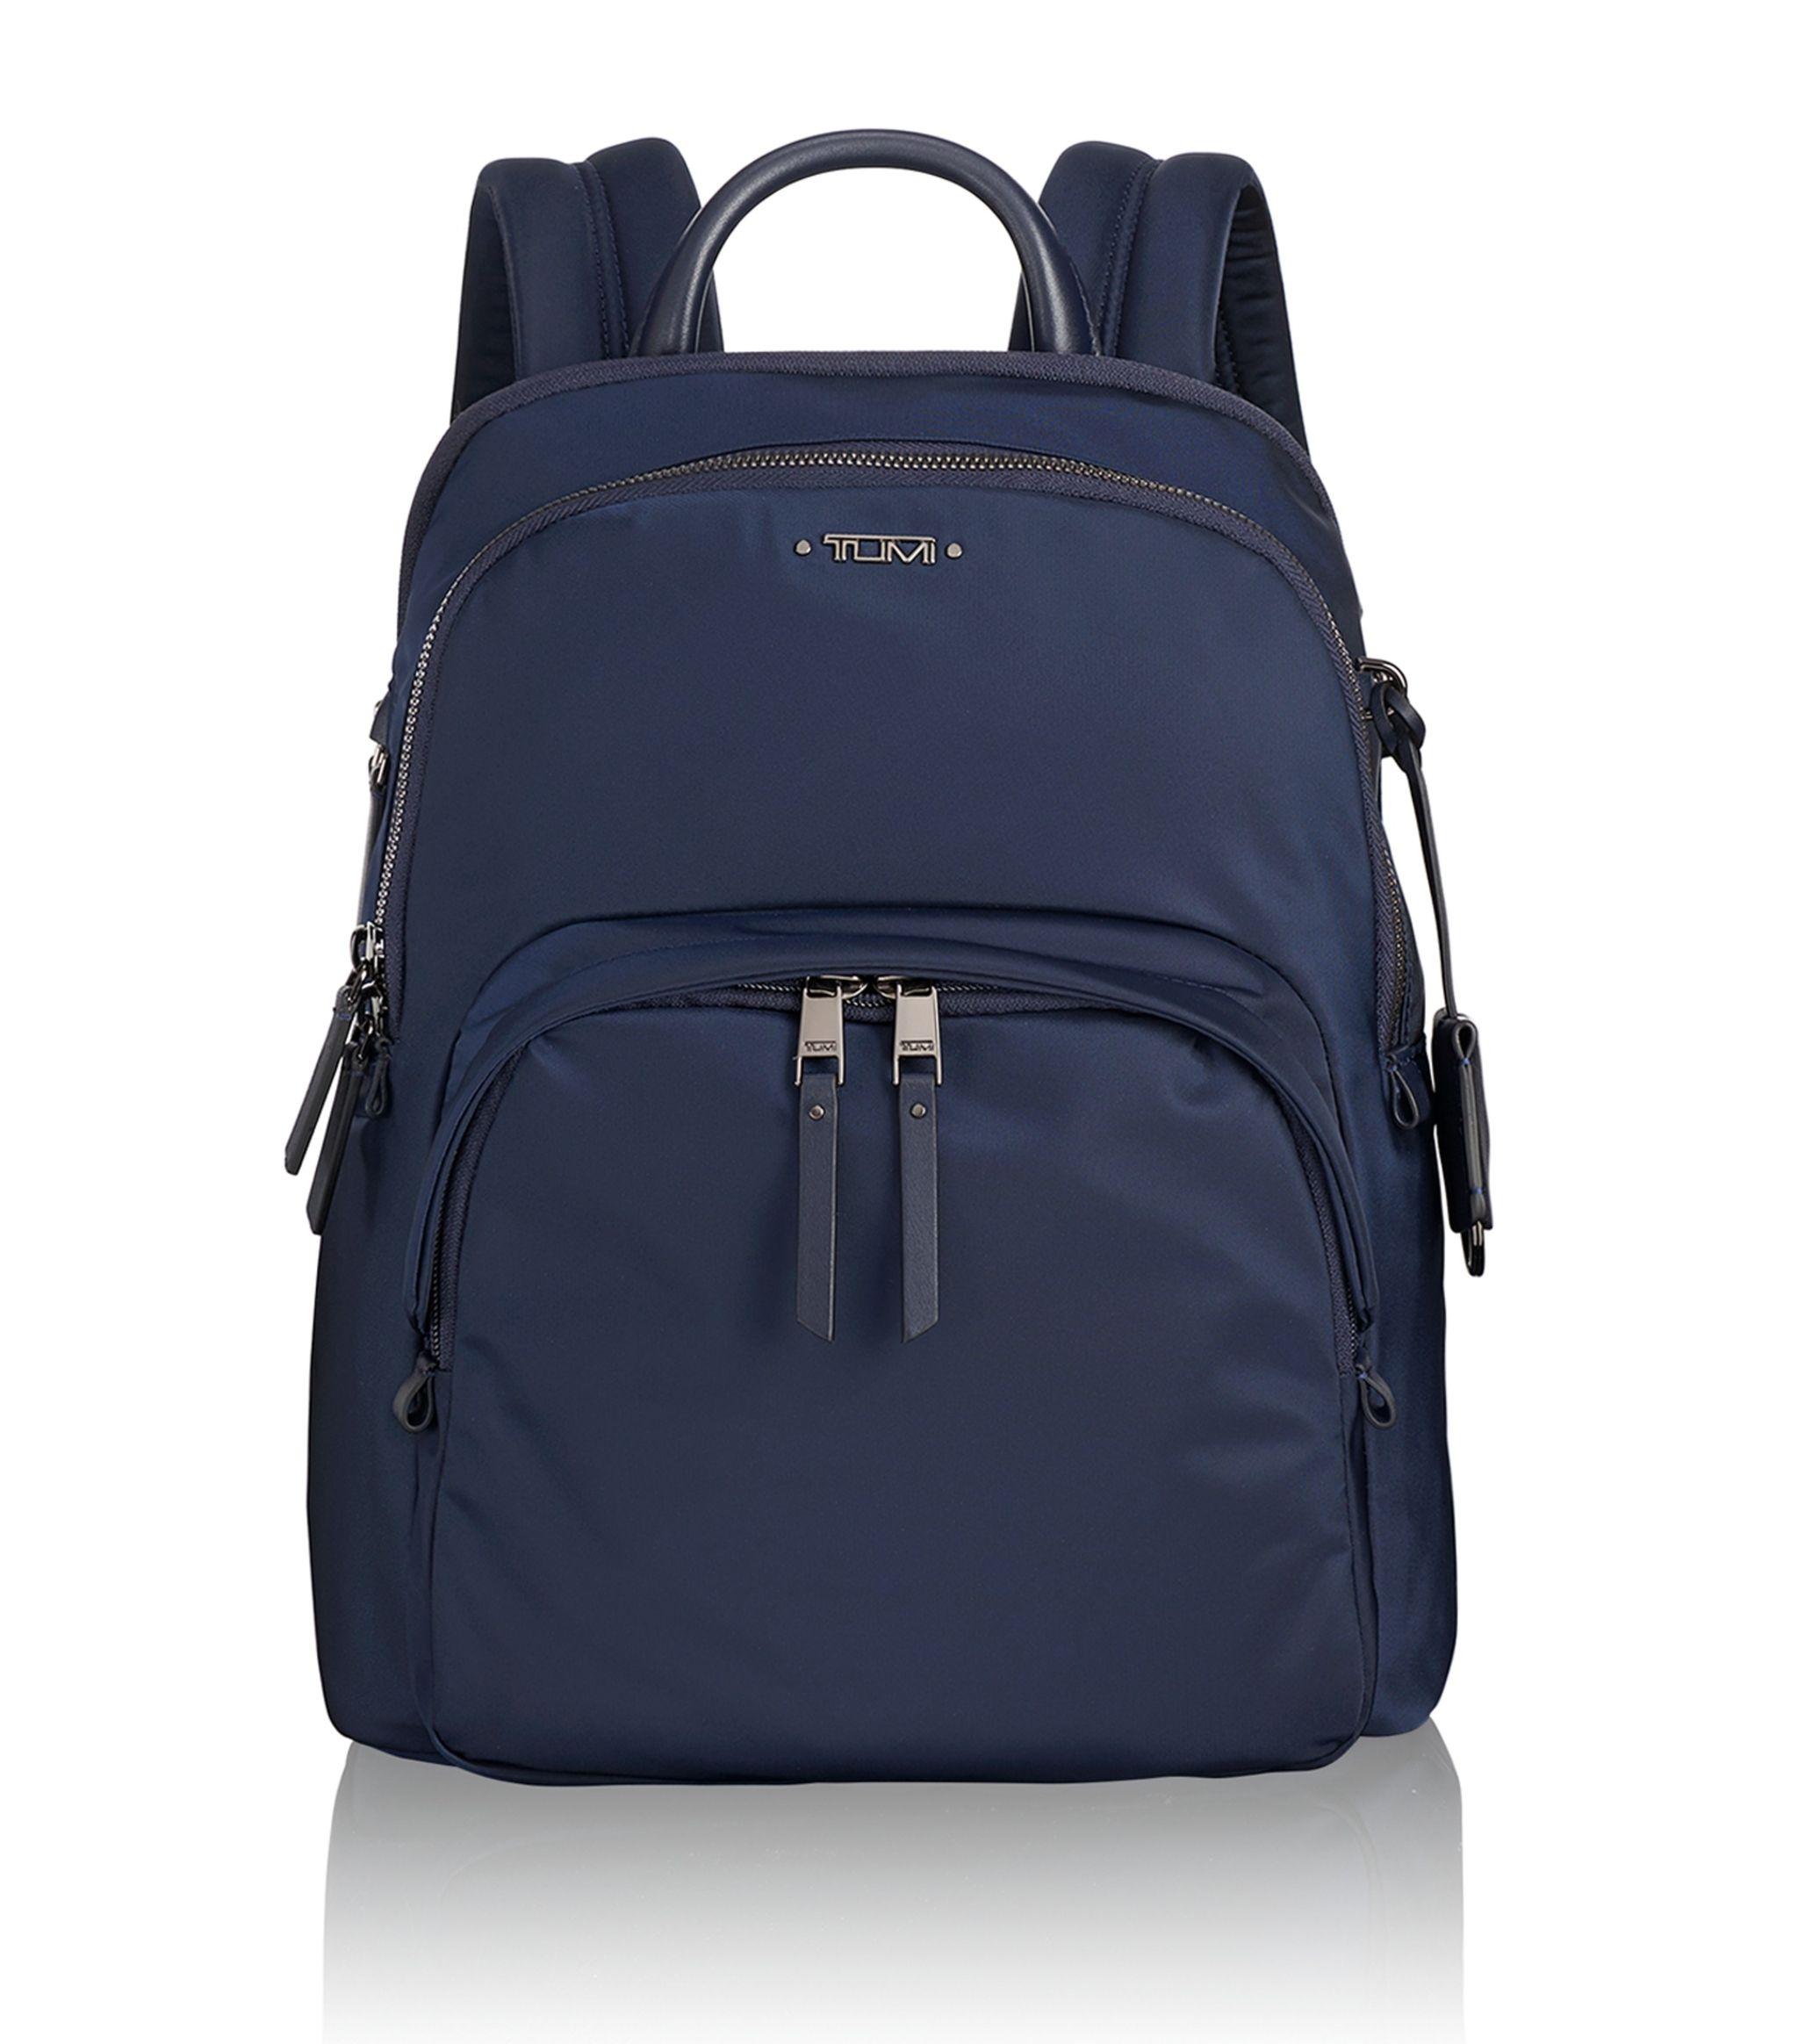 Tumi Small Backpack in Navy (Blue) for Men - Lyst